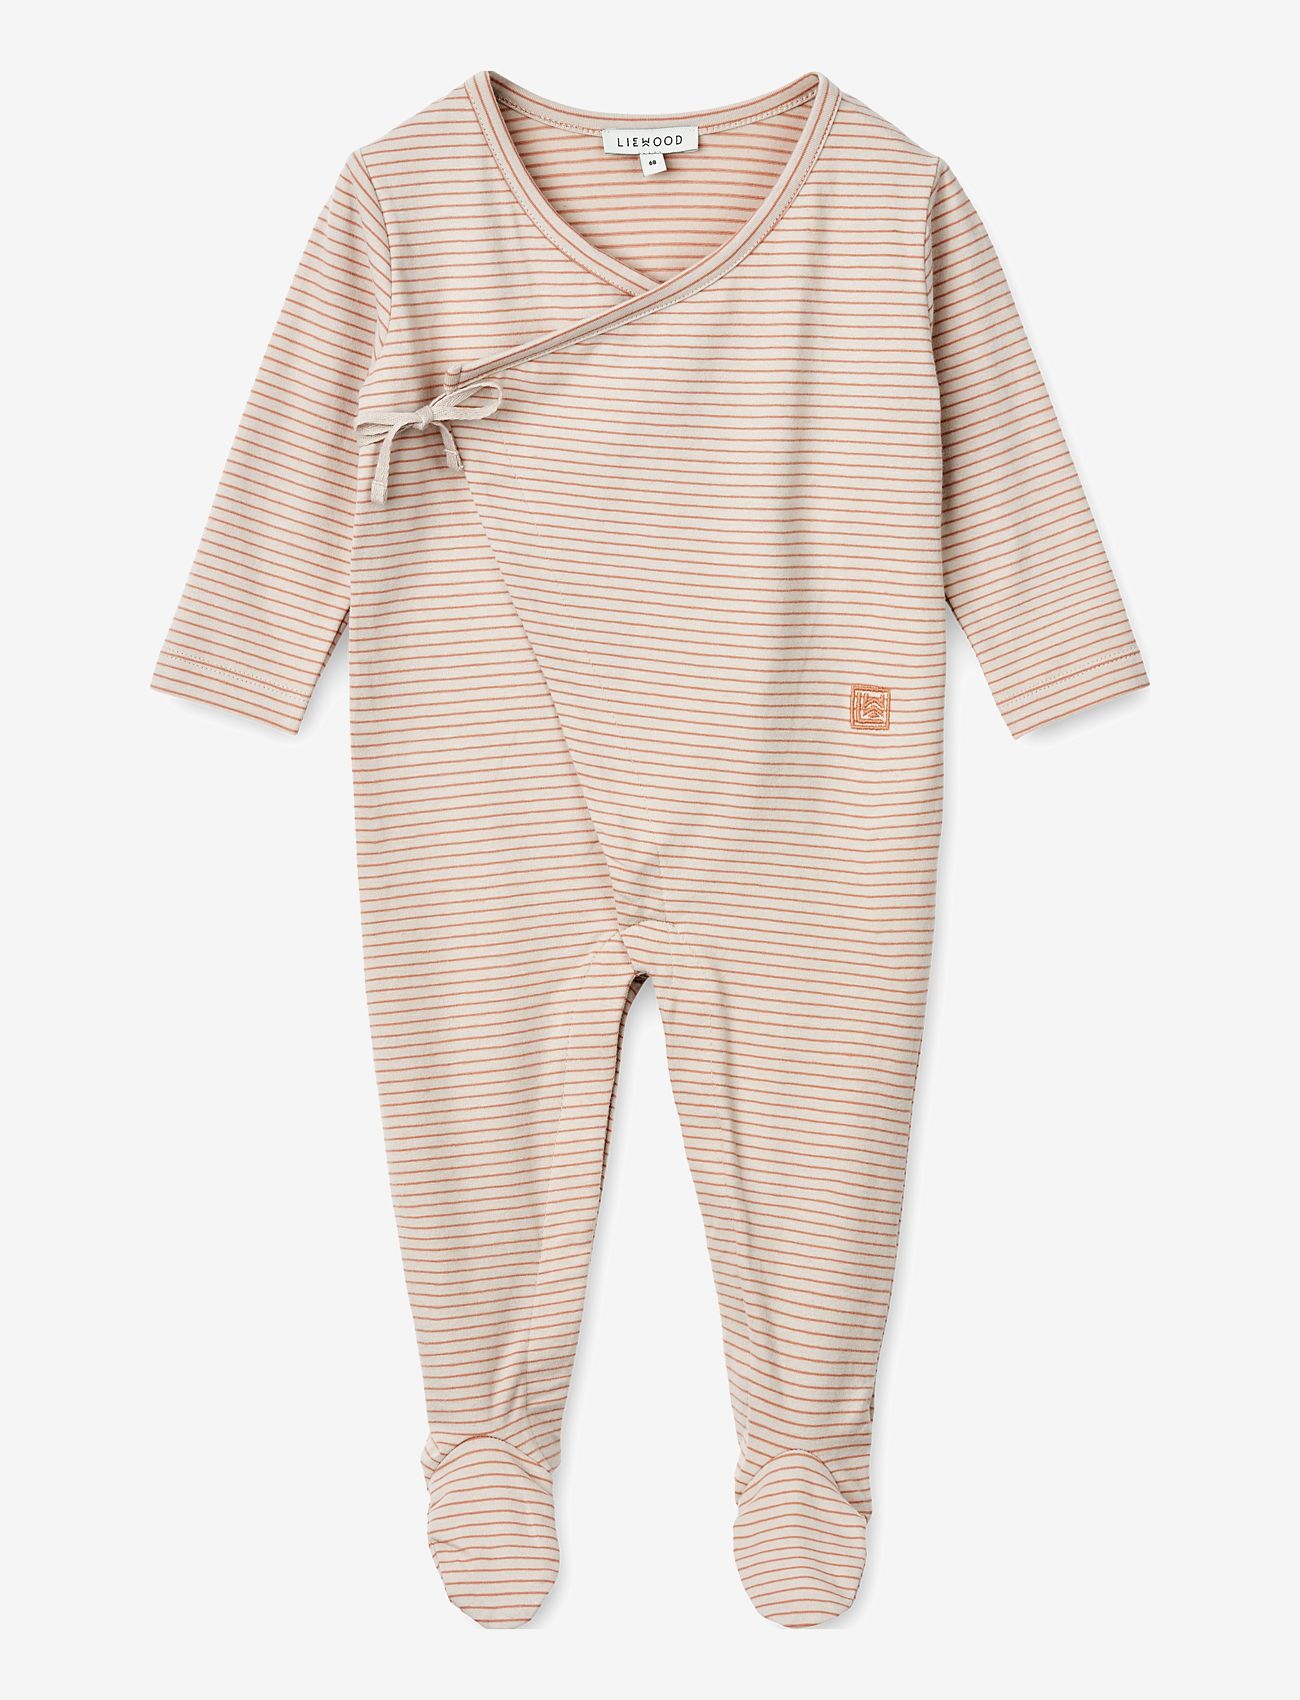 Liewood - Bolde Baby Stripe Jumpsuit - schlafoveralls - y/d stripe sandy / tuscany rose - 0